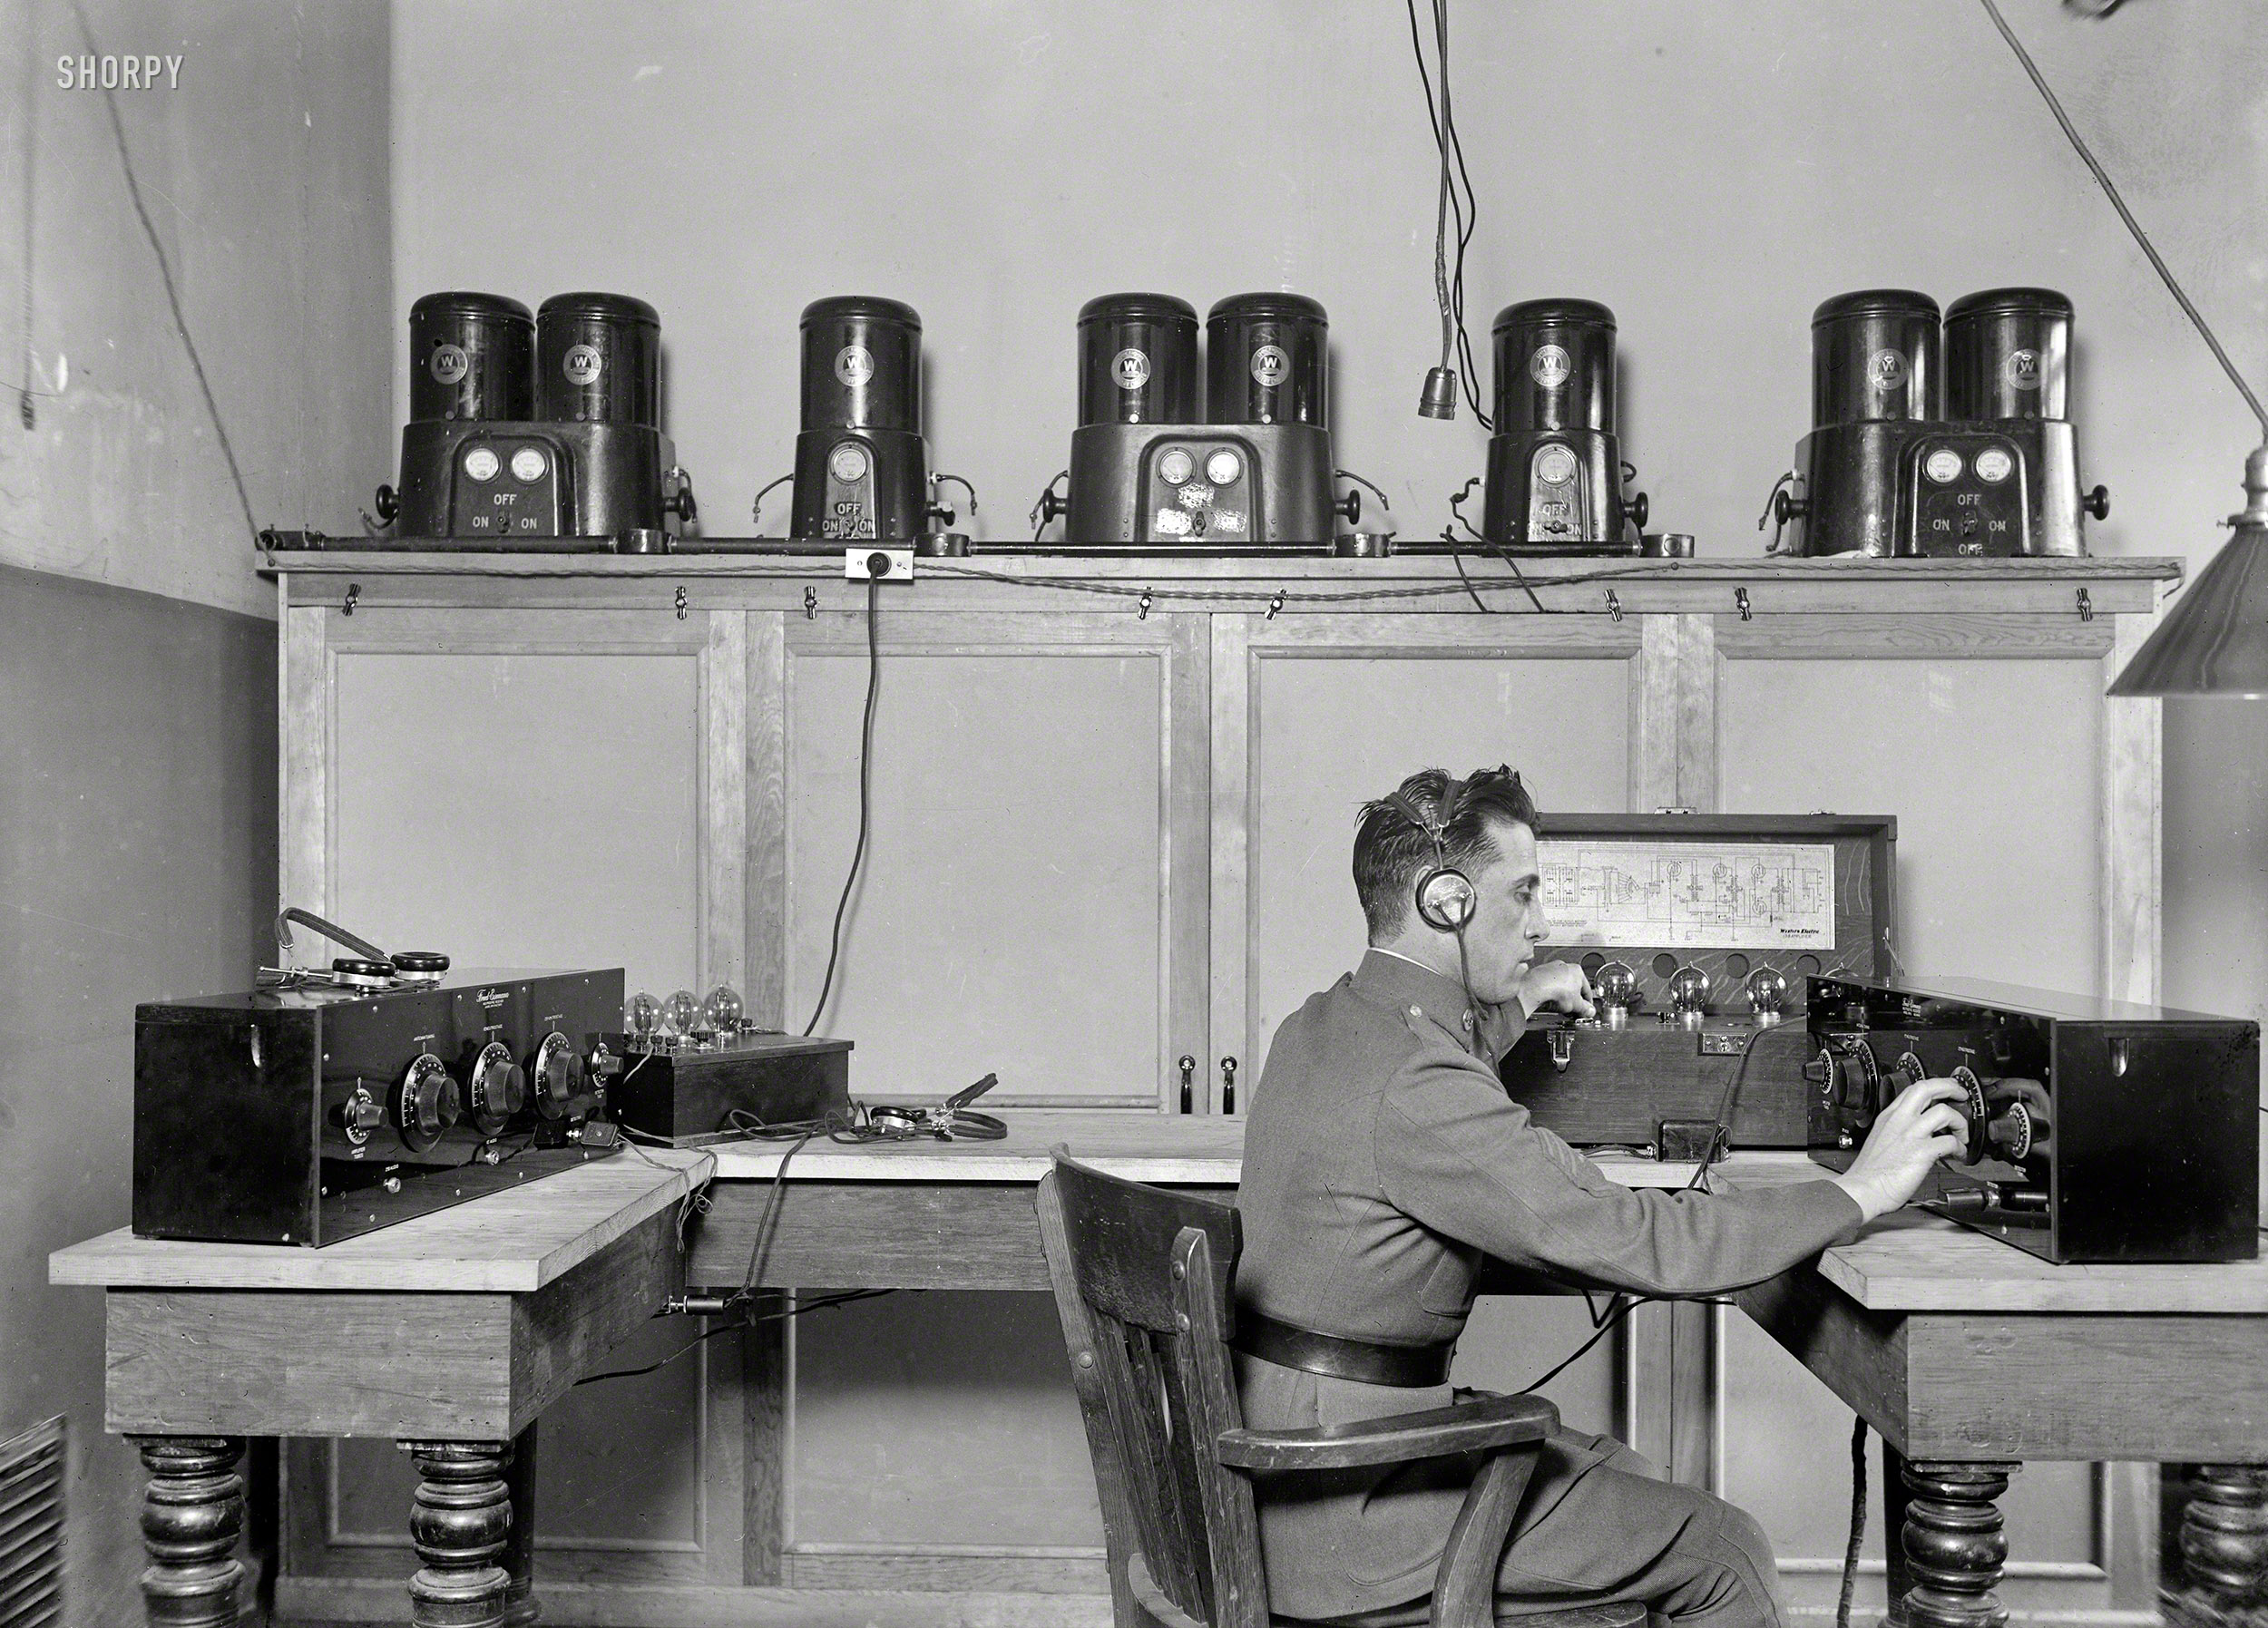 Washington, D.C., 1924. Tweaking the dials on a Freed Eisemann Neutrodyne receiver and a Western Electric 138 amplifier. On the shelf: Westinghouse "Rectigon" battery chargers. Harris & Ewing glass negative. View full size.